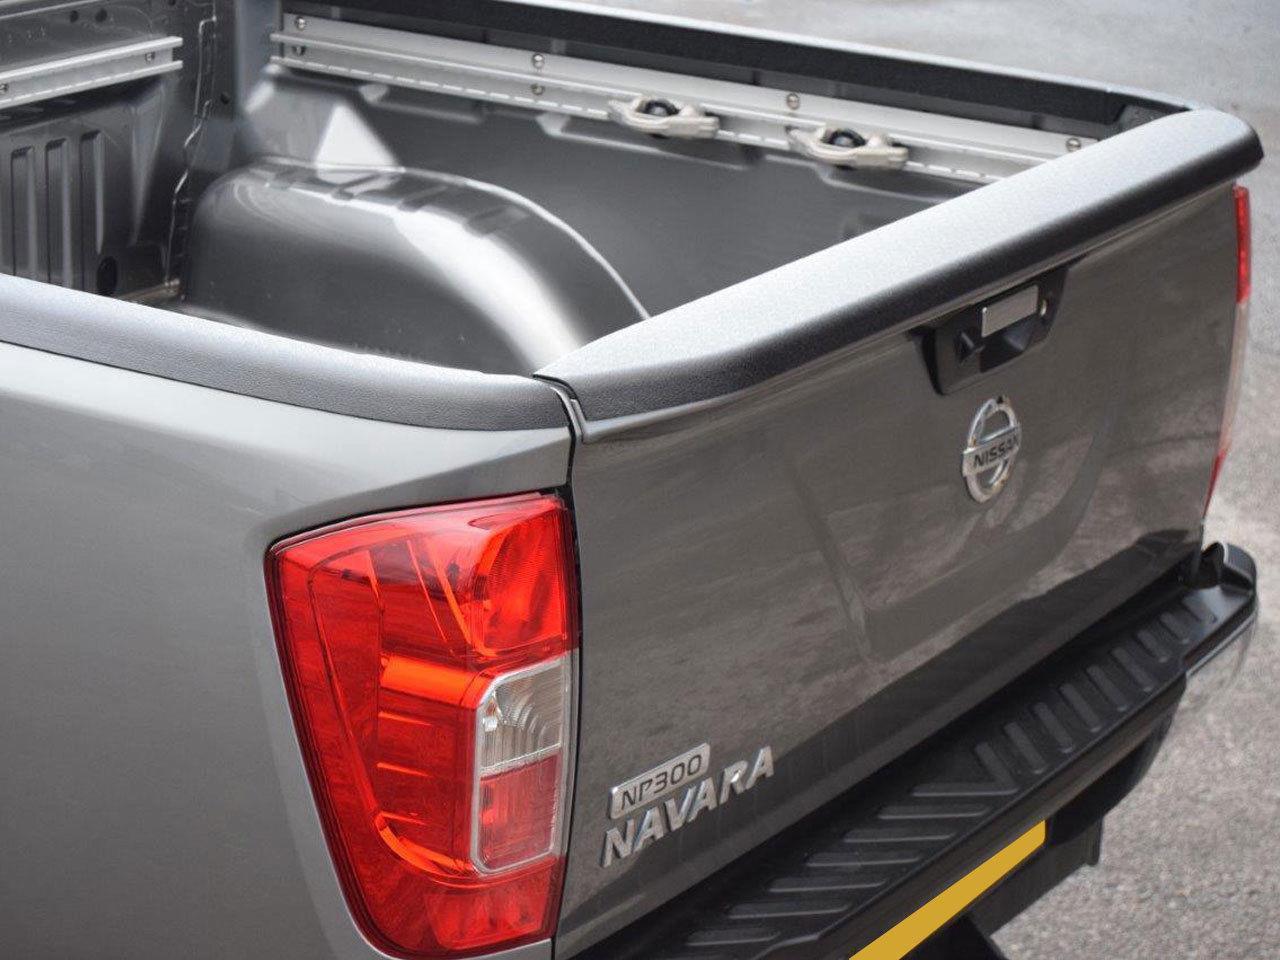 NISSAN NAVARA NP300 2016 ON - DOUBLE CAB LOAD BED RAIL CAPS - Storm Xccessories2